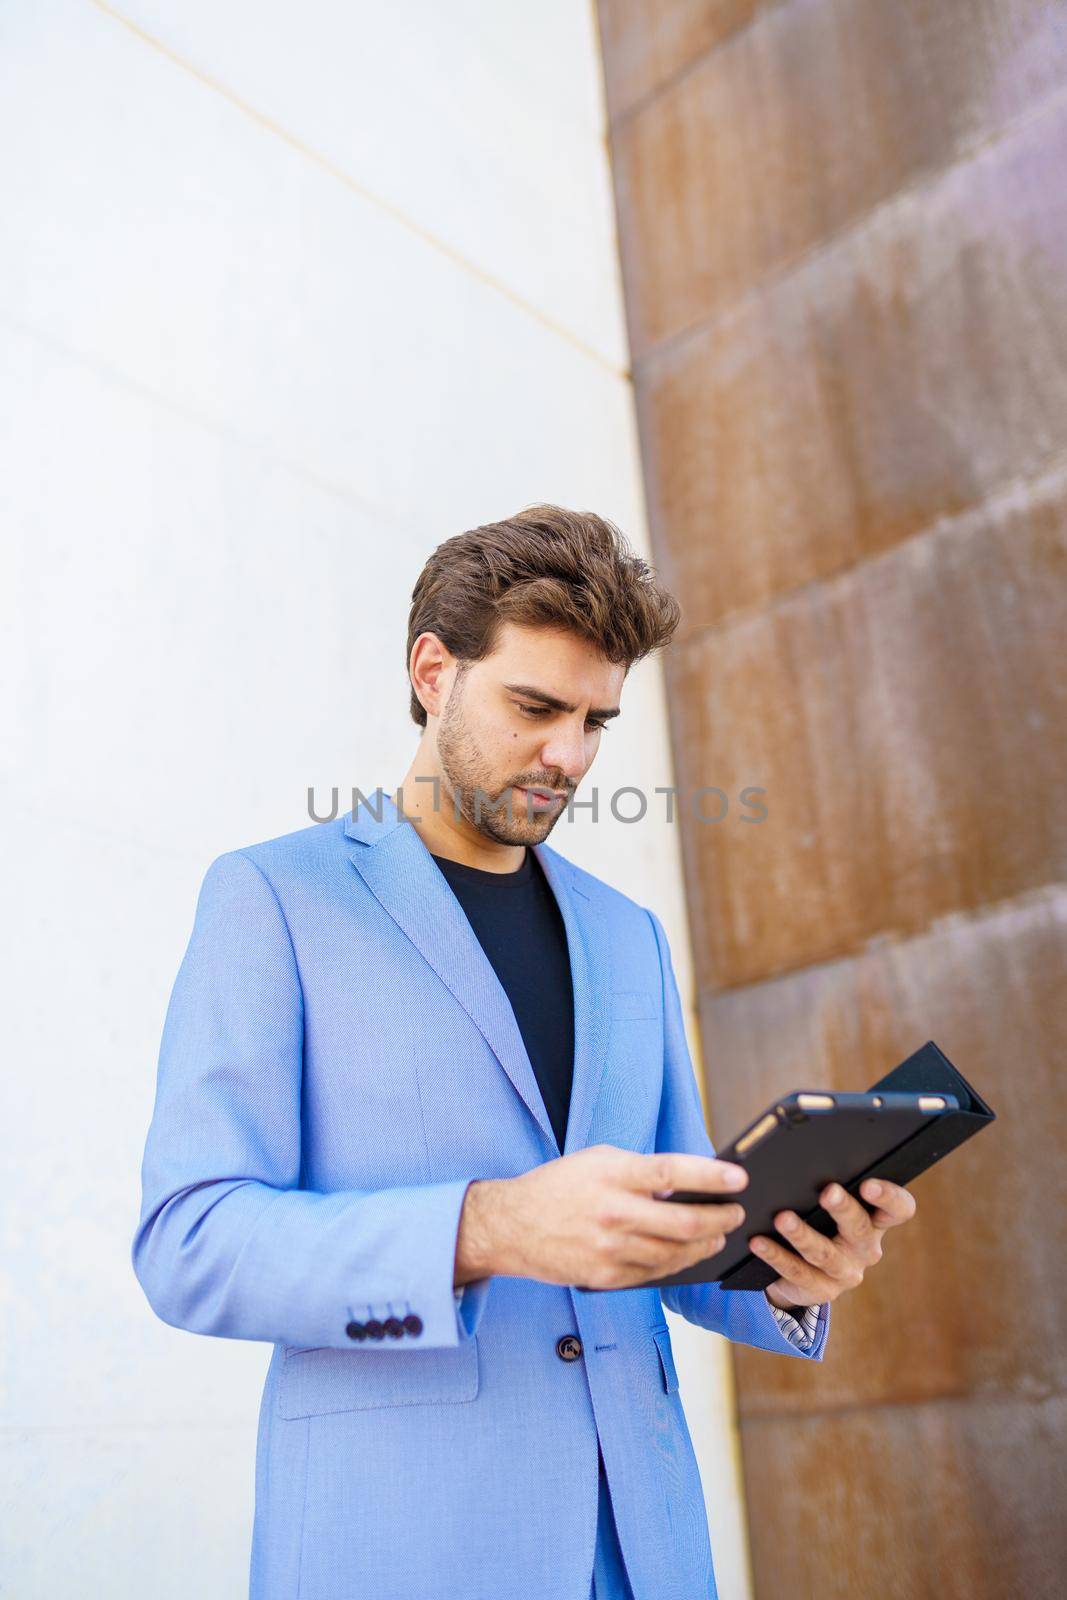 Man in a suit using a digital tablet outdoors